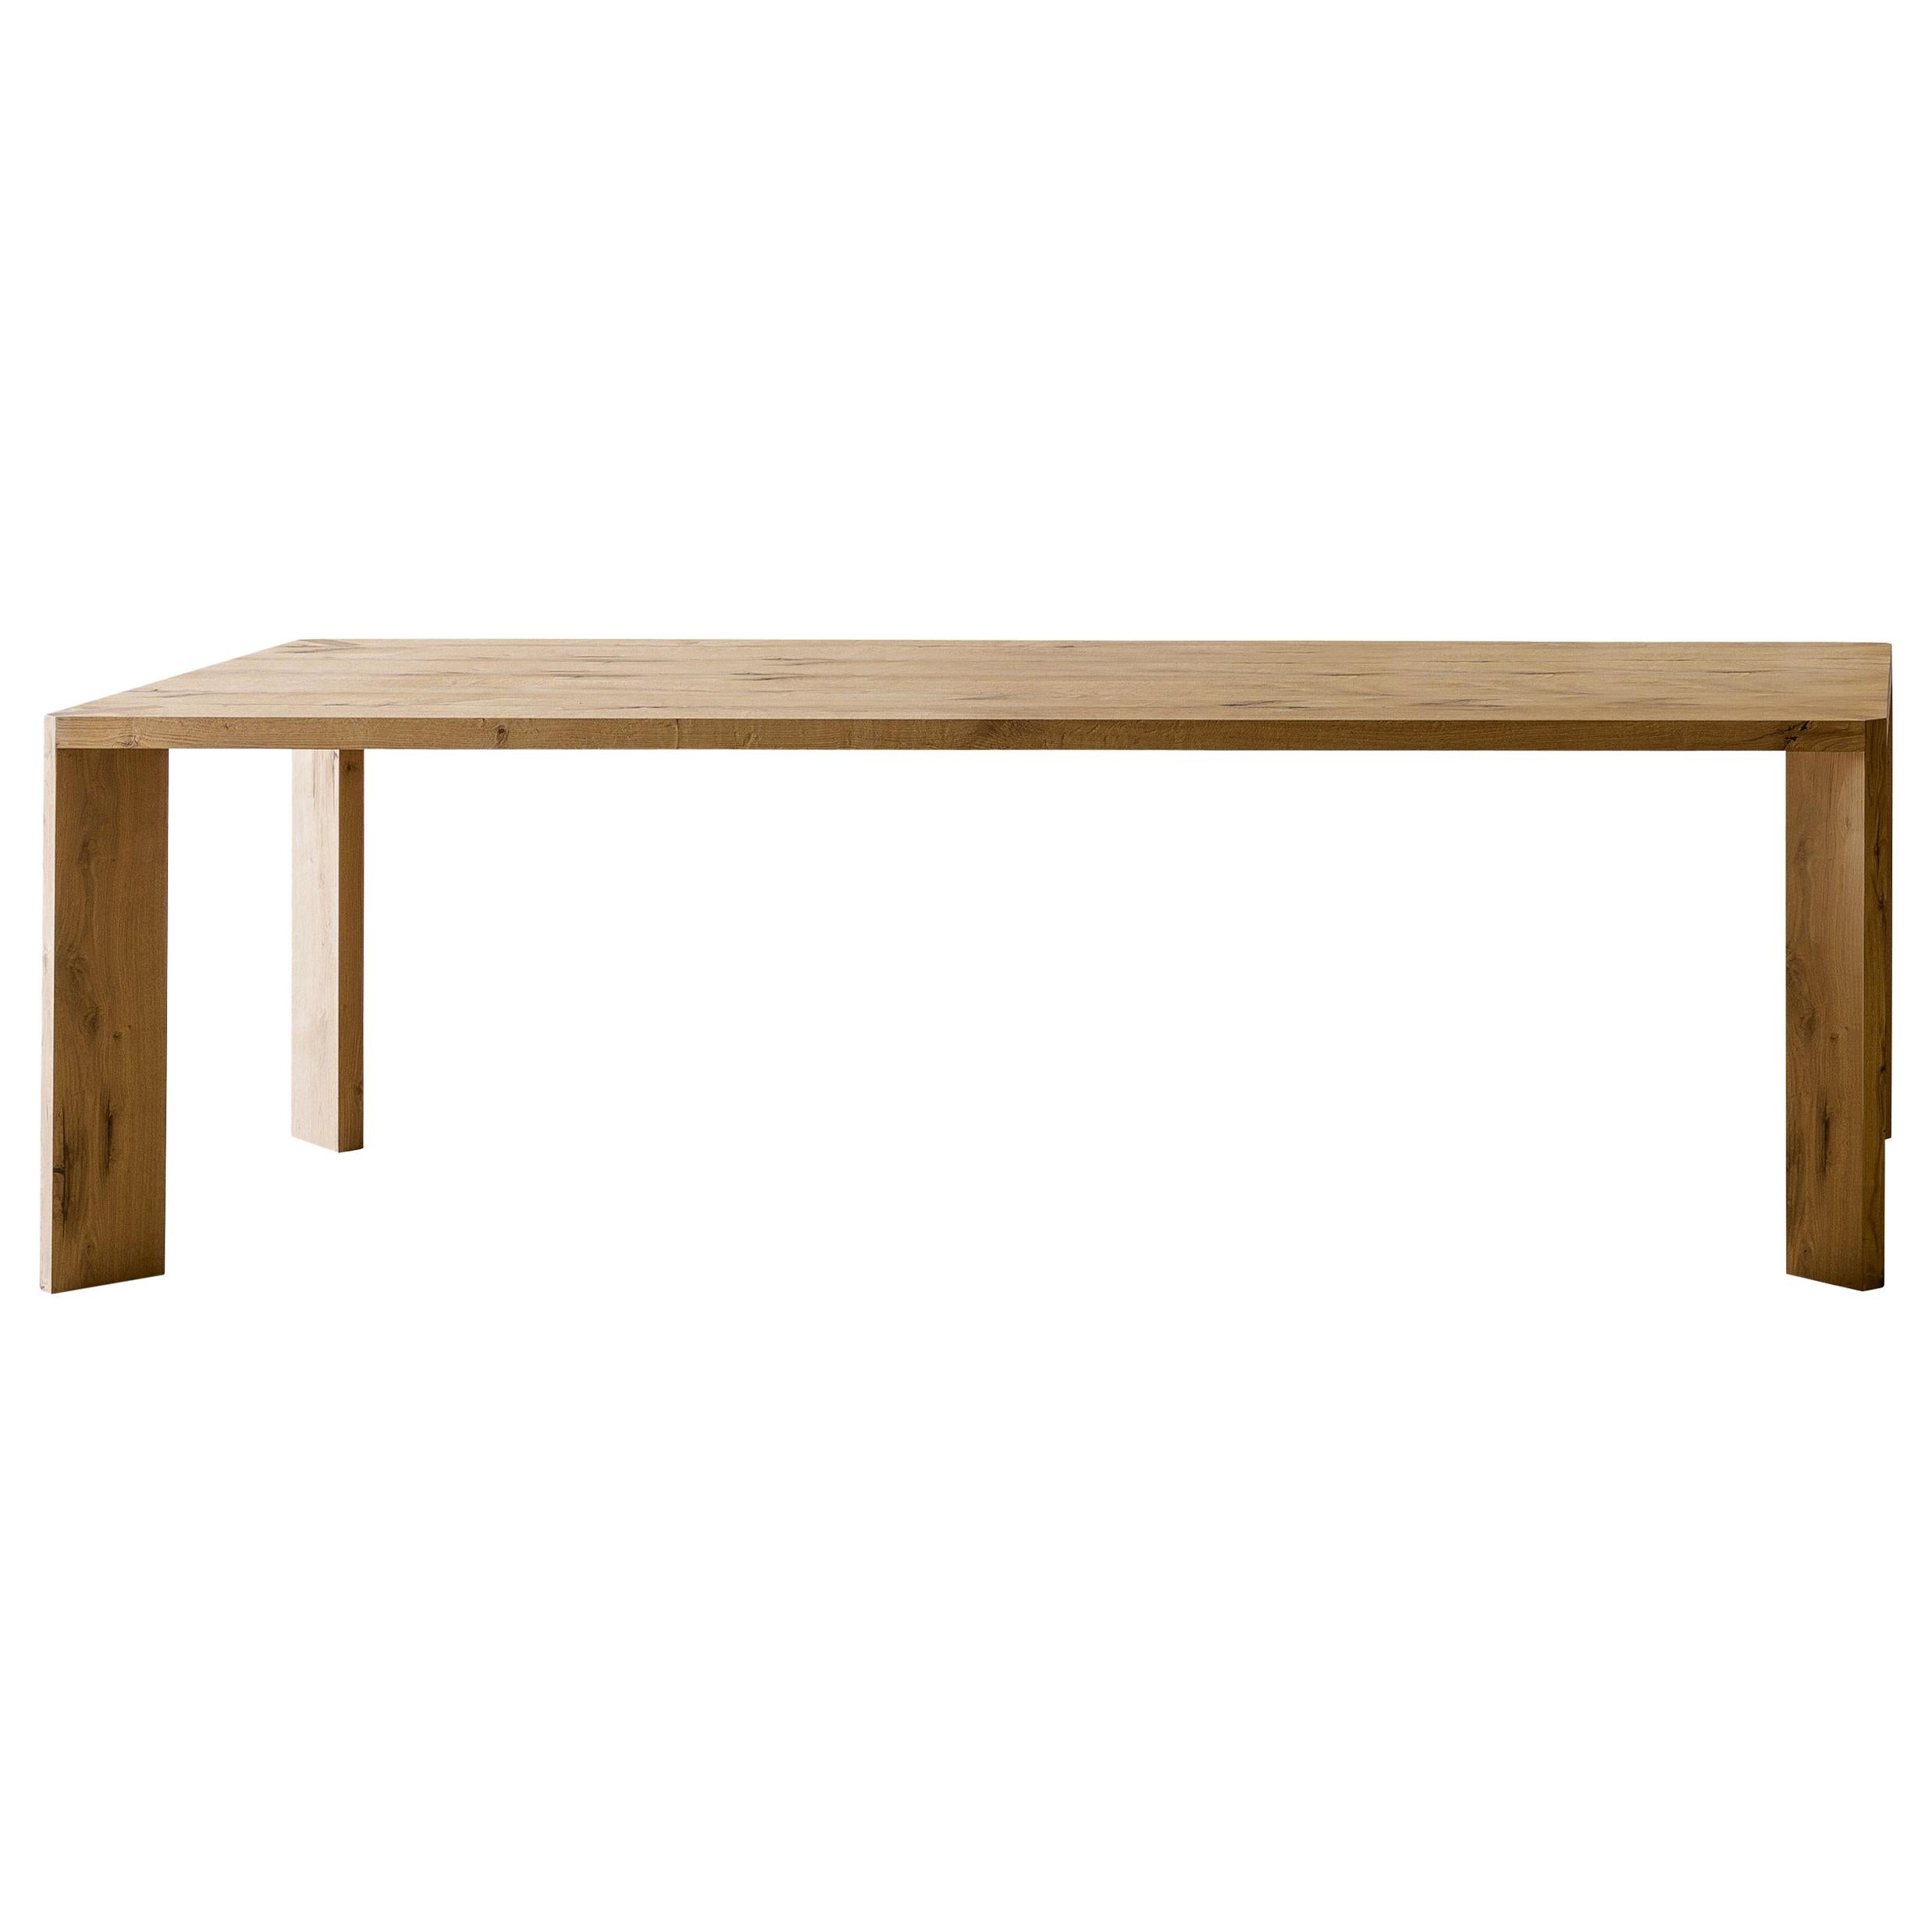 Manero Large Table in Vintage Oak by Paolo Cappello For Sale